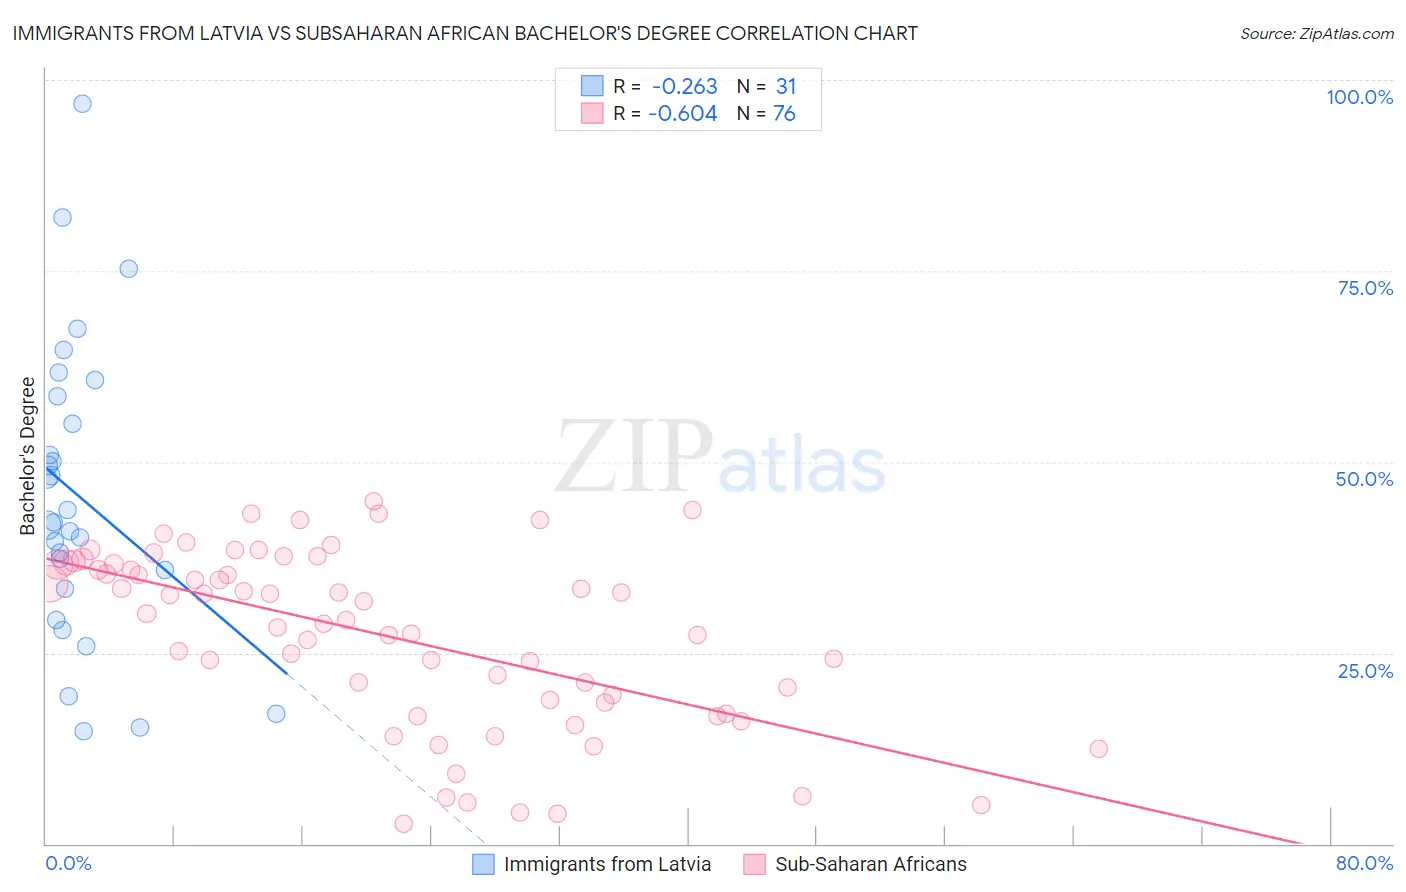 Immigrants from Latvia vs Subsaharan African Bachelor's Degree